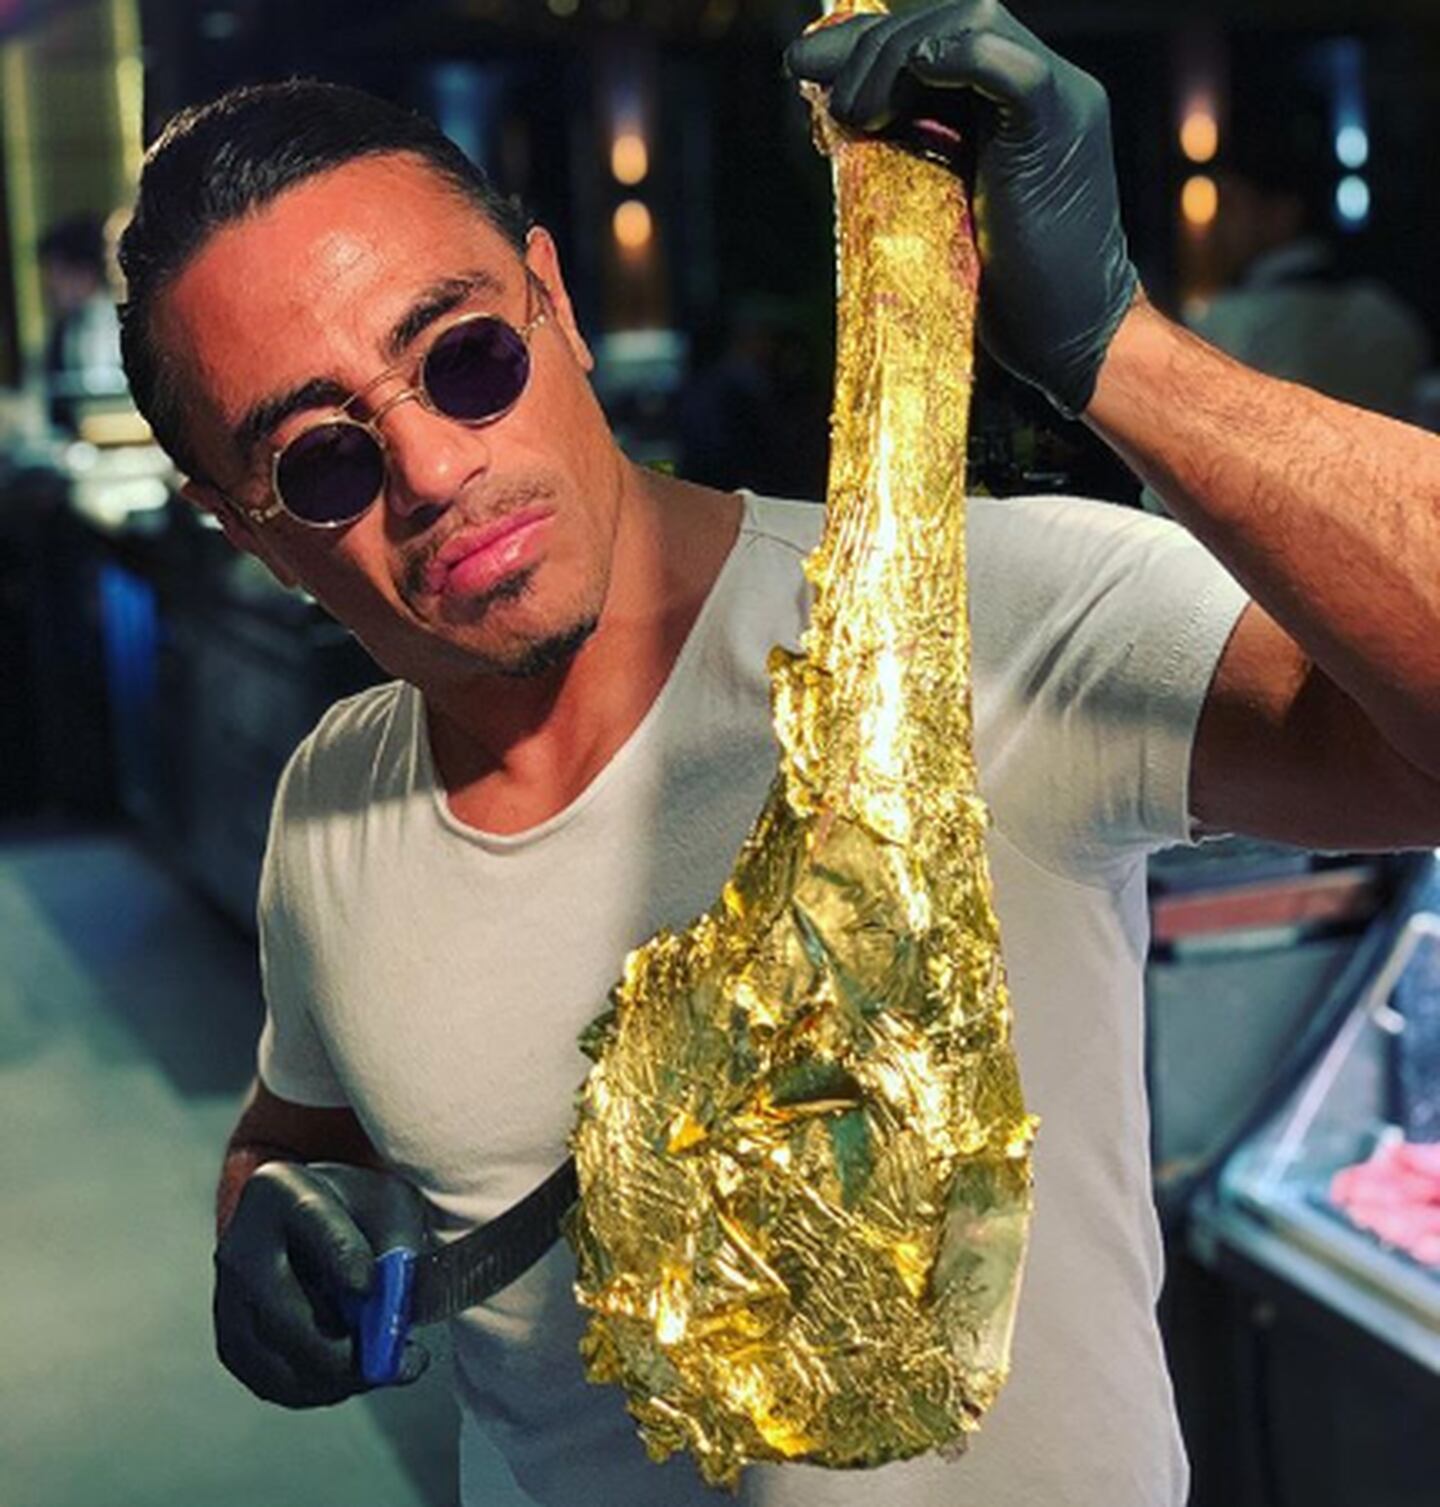 The golden steak is one of Salt Bae’s signature dishes and sells for £1,450. Instagram / @nusr_et    